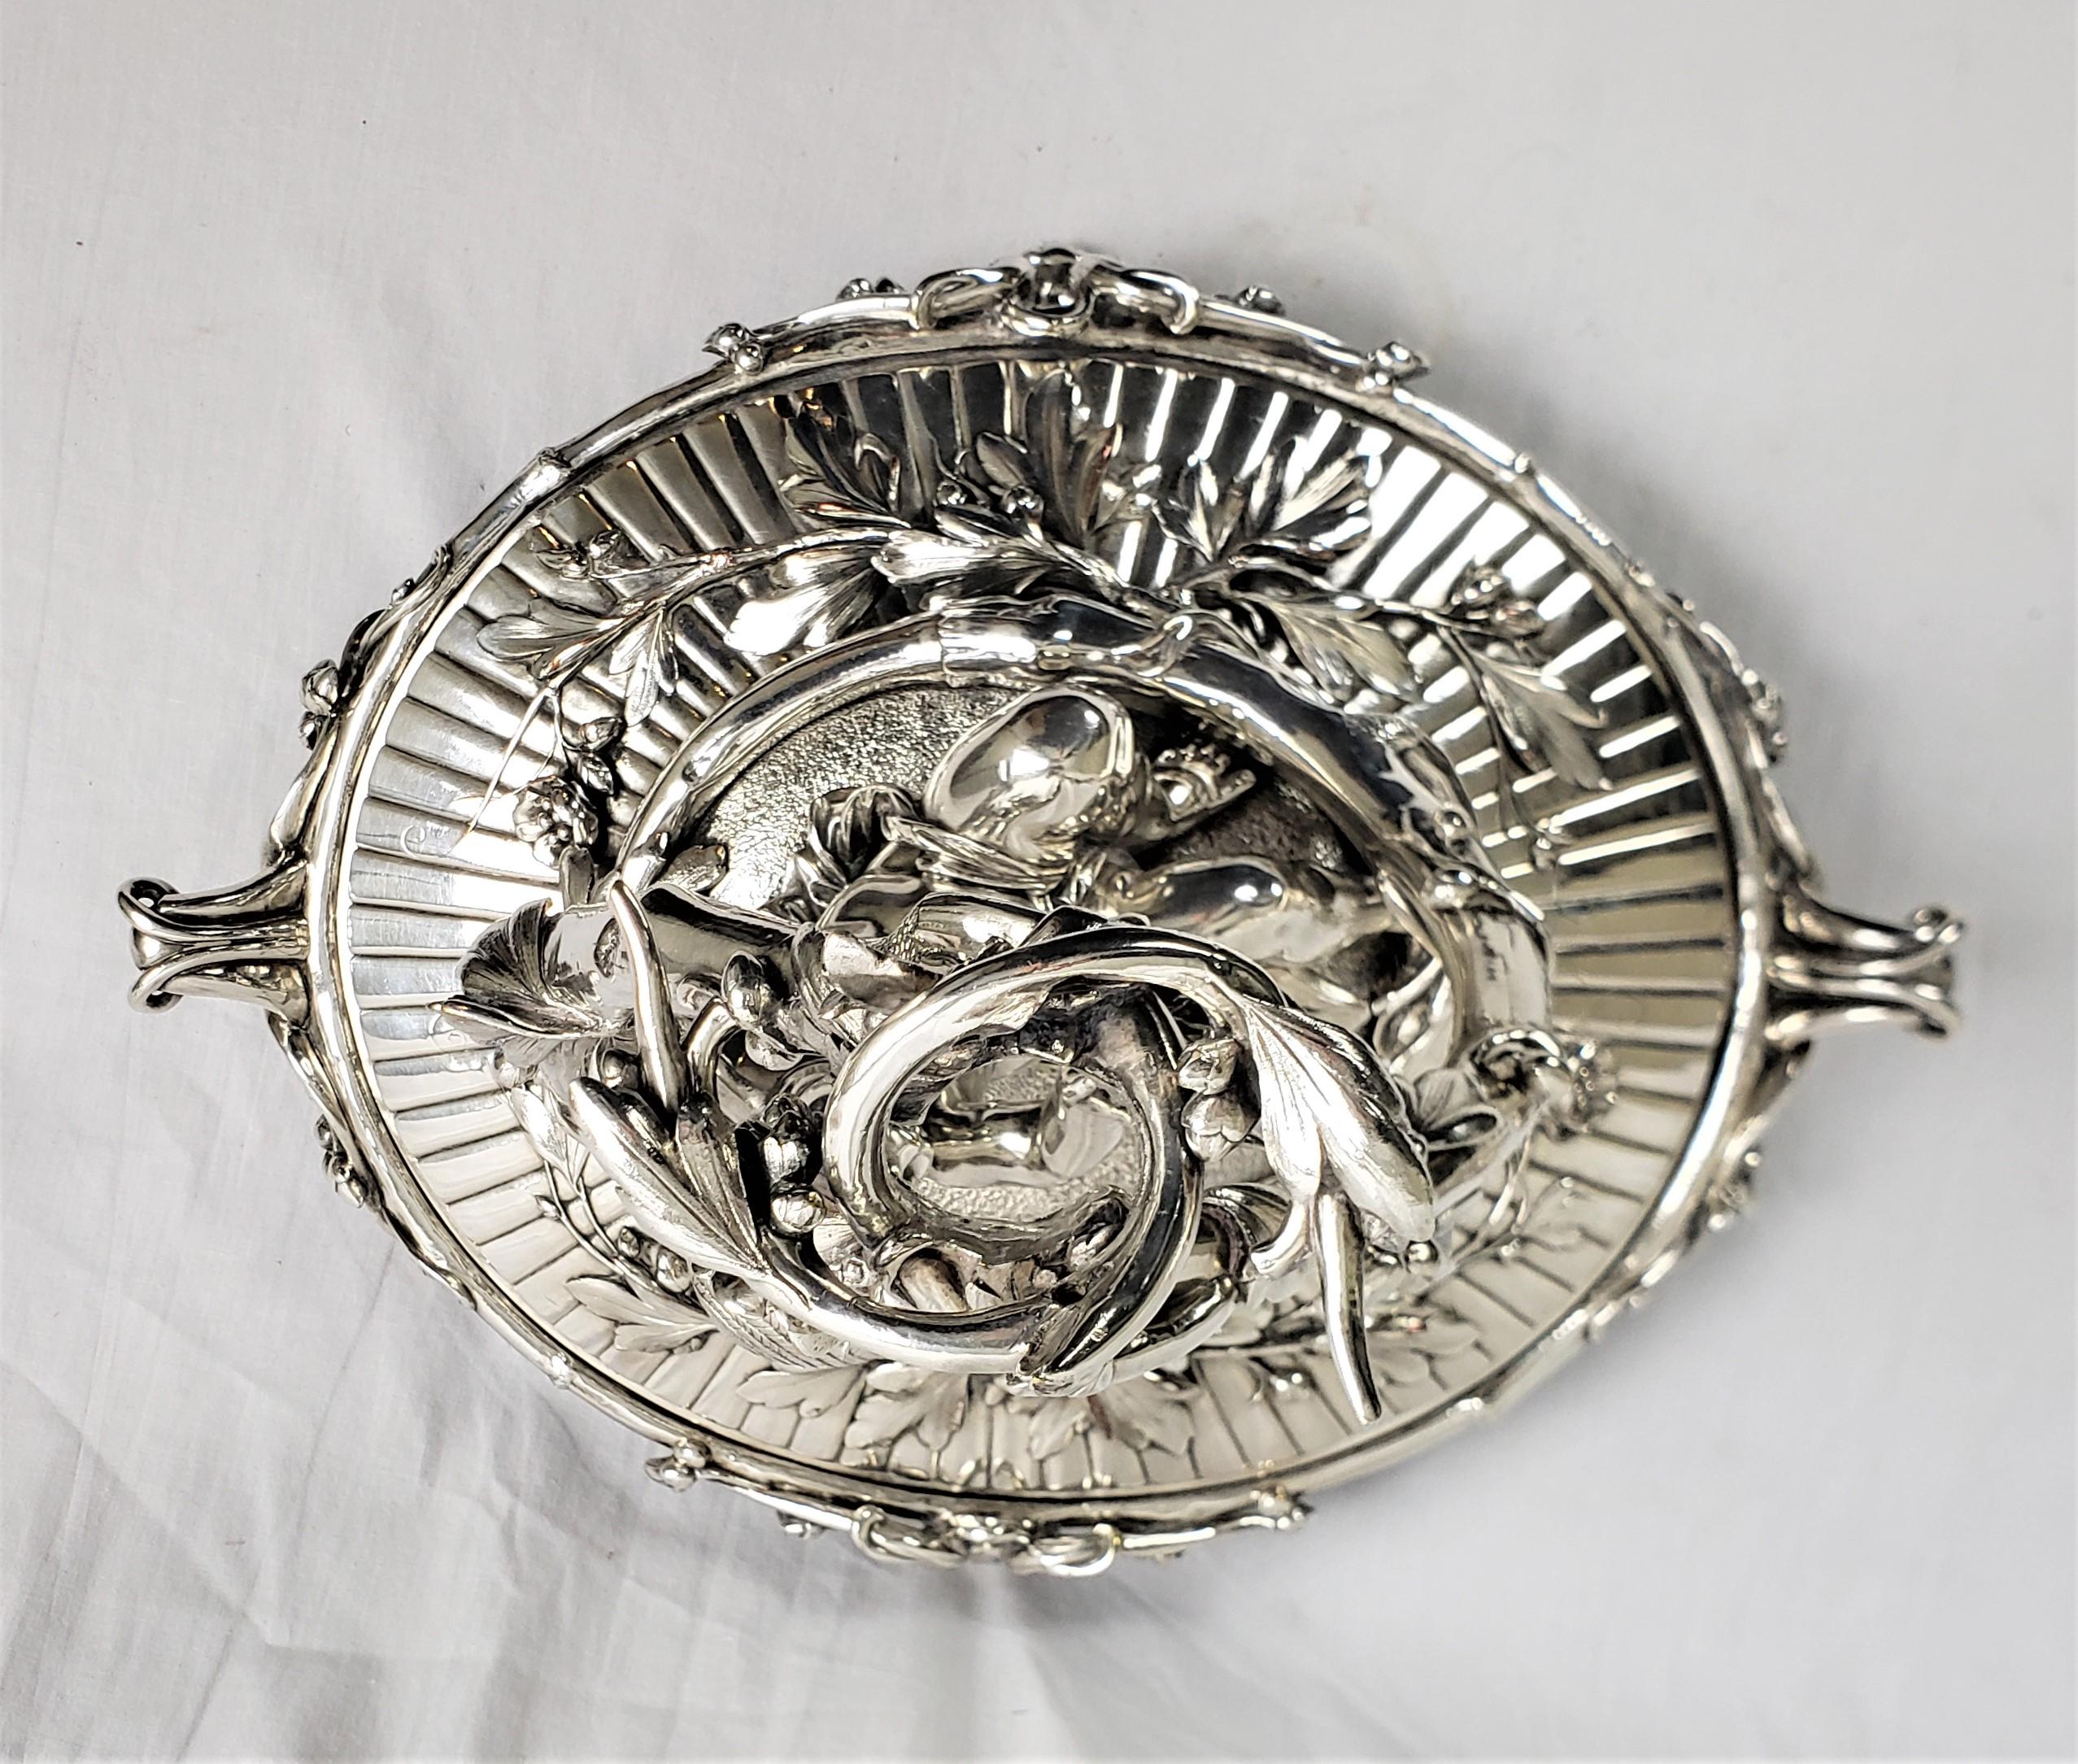 Huge Antique Christofle Silver Plated Centerpiece with a Figural Reclining Child For Sale 2